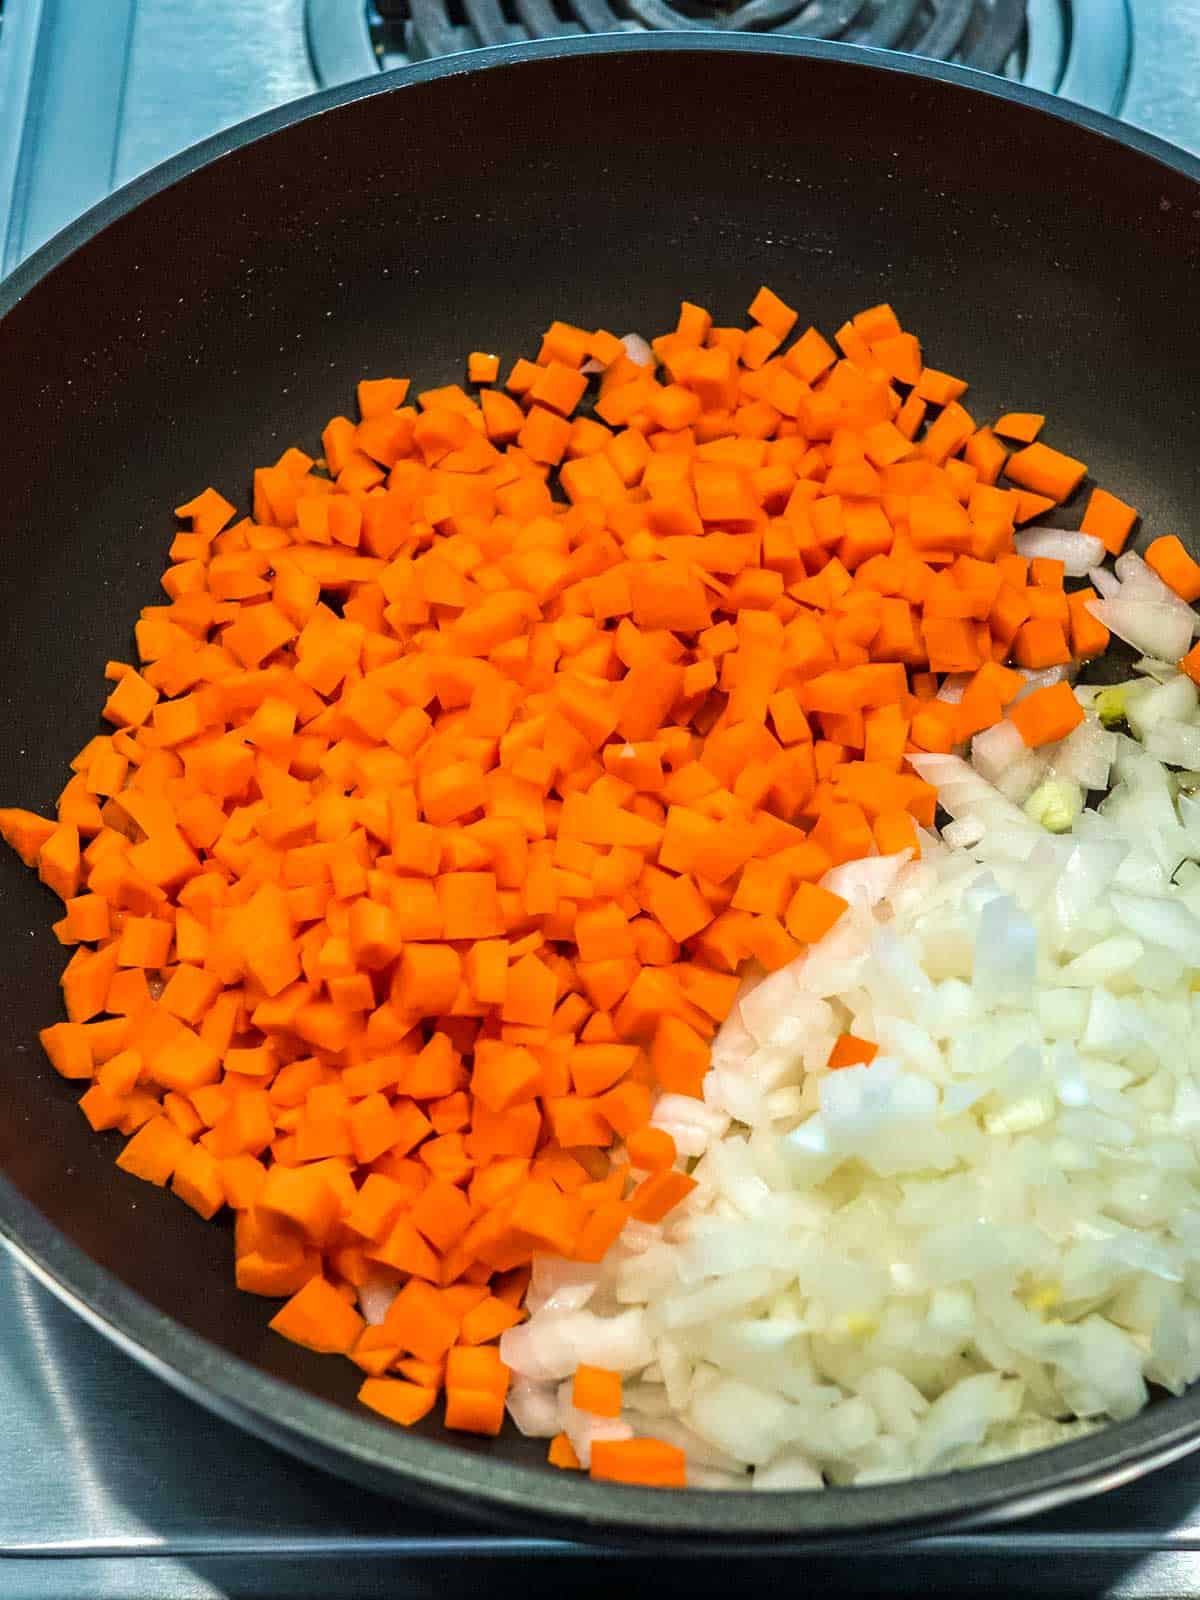 Onions and carrots in a skillet.